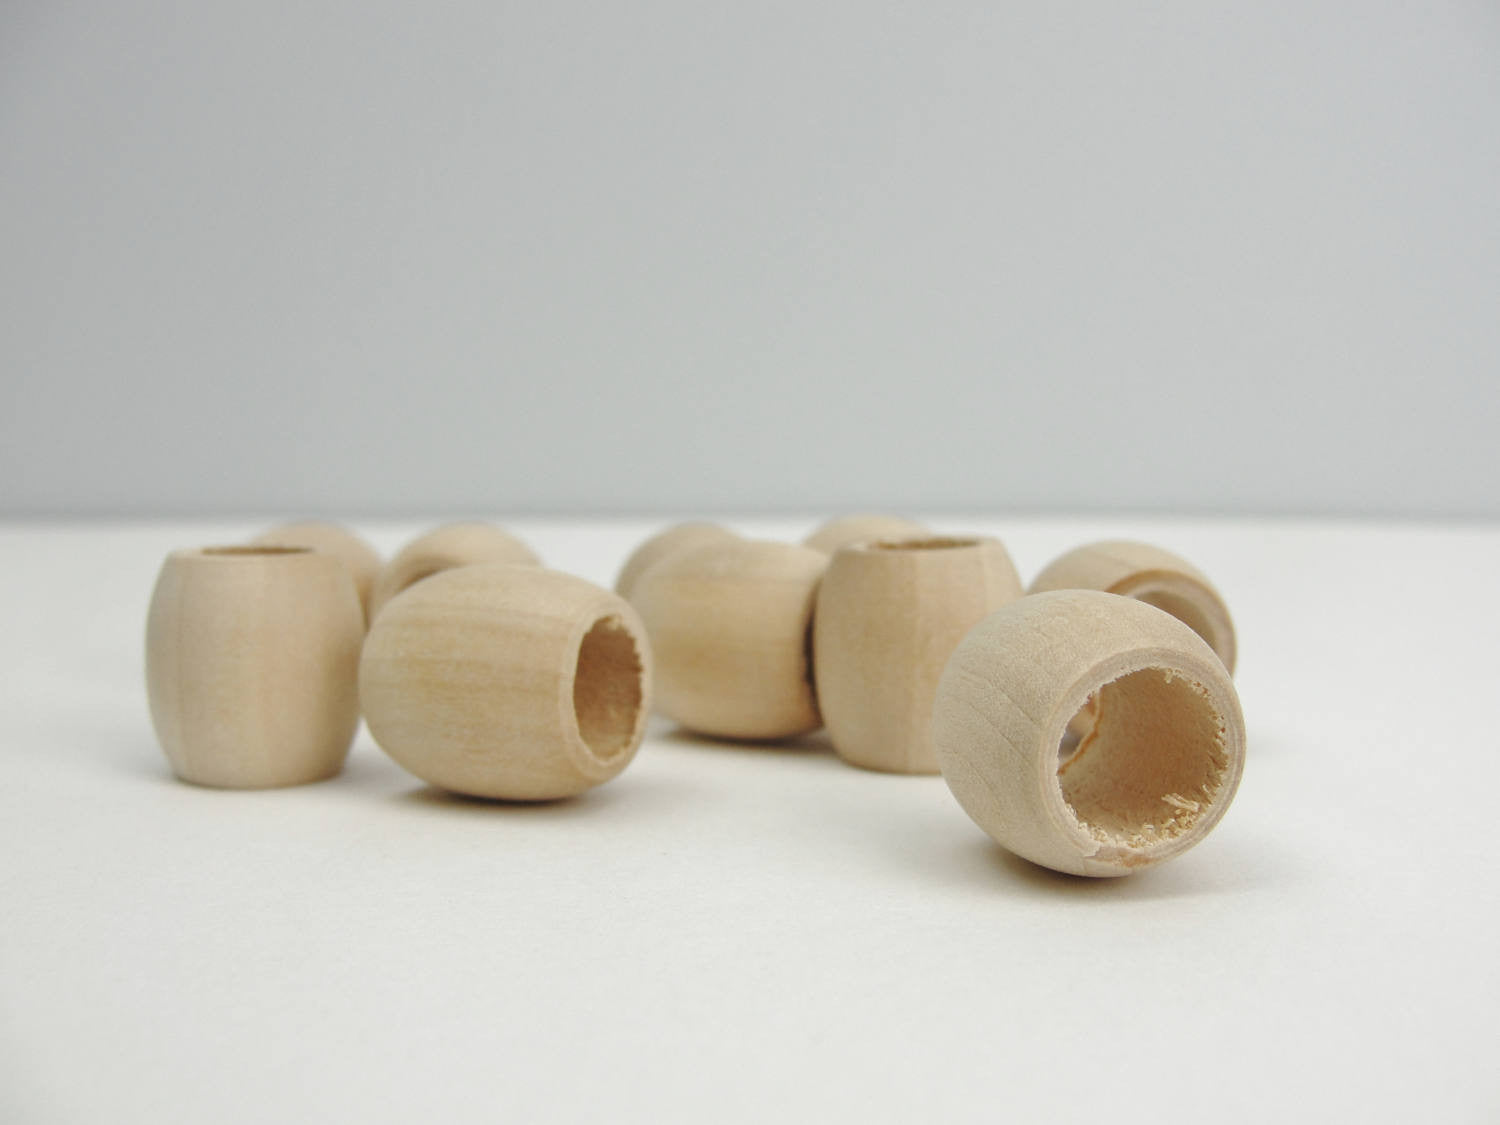 Wood Round Beads 1/4 inch with 5/64 inch Hole